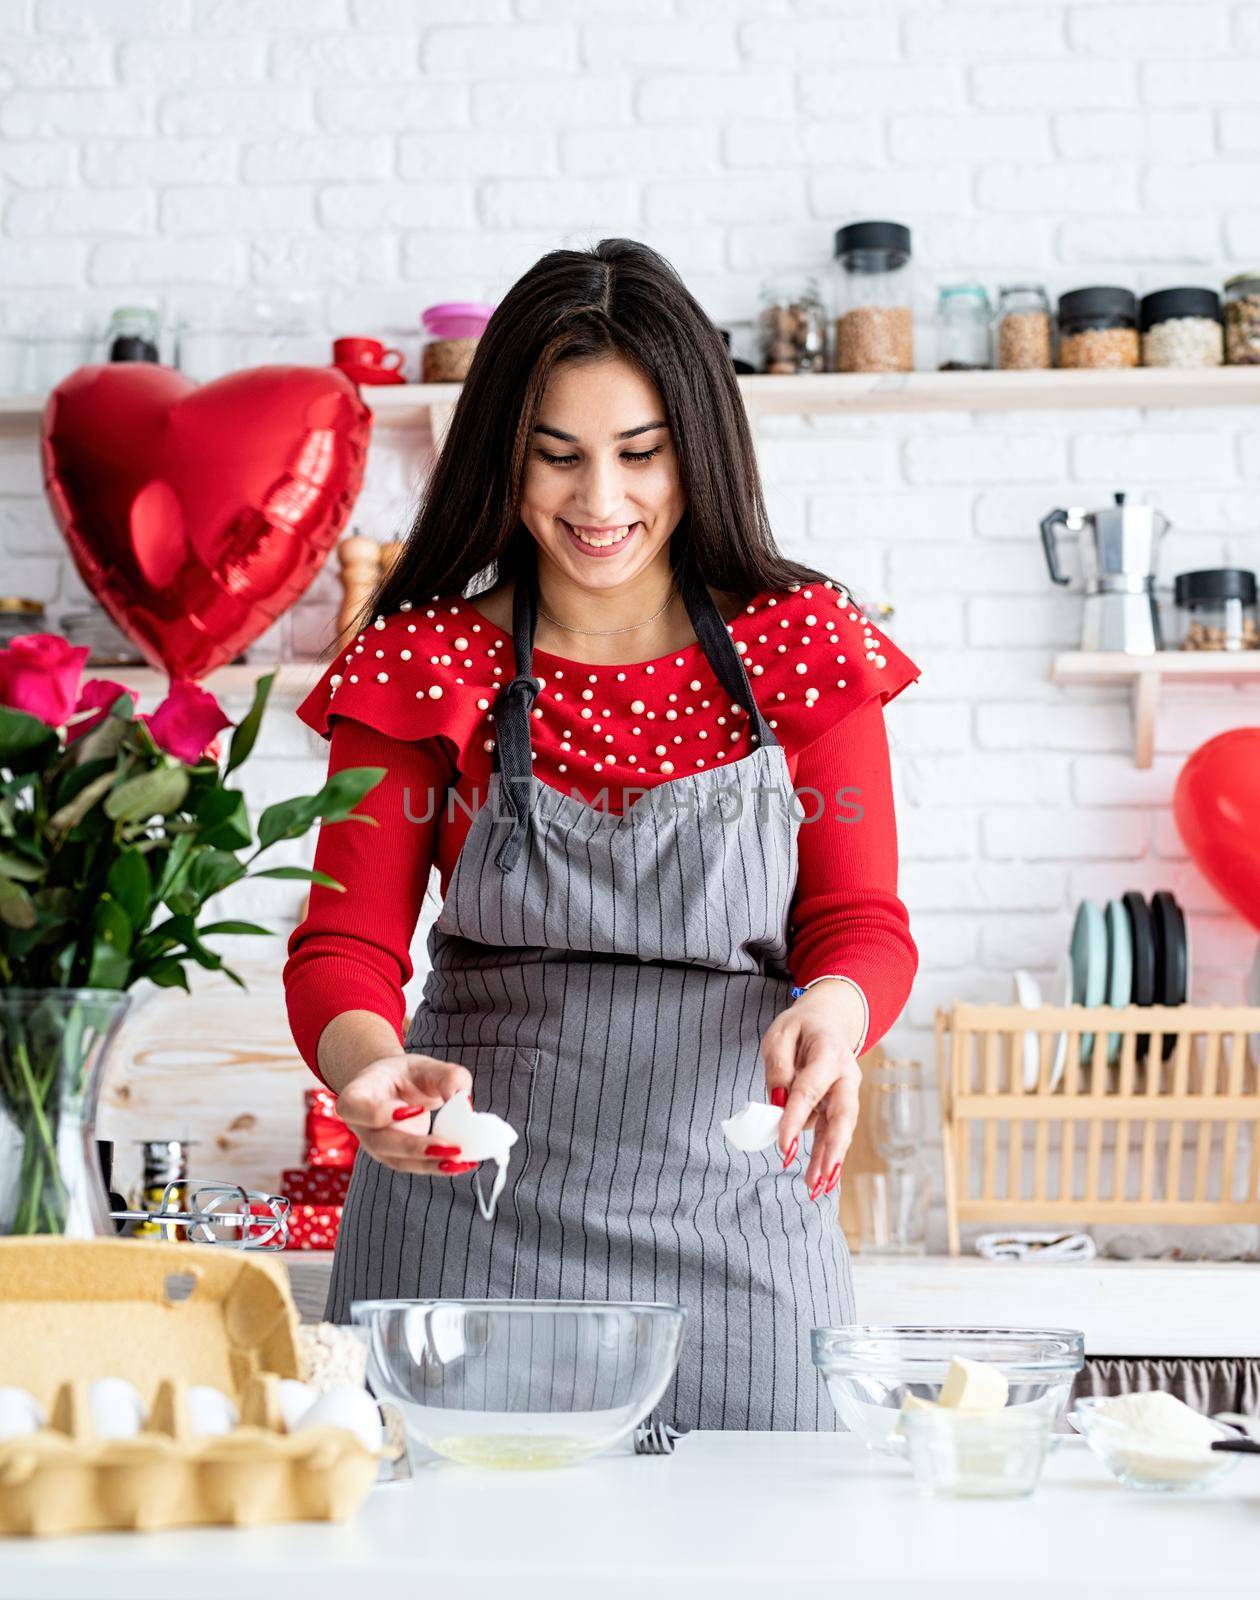 Valentines Day. Woman in red dress and gray apron making valentine cookies at the kitchen